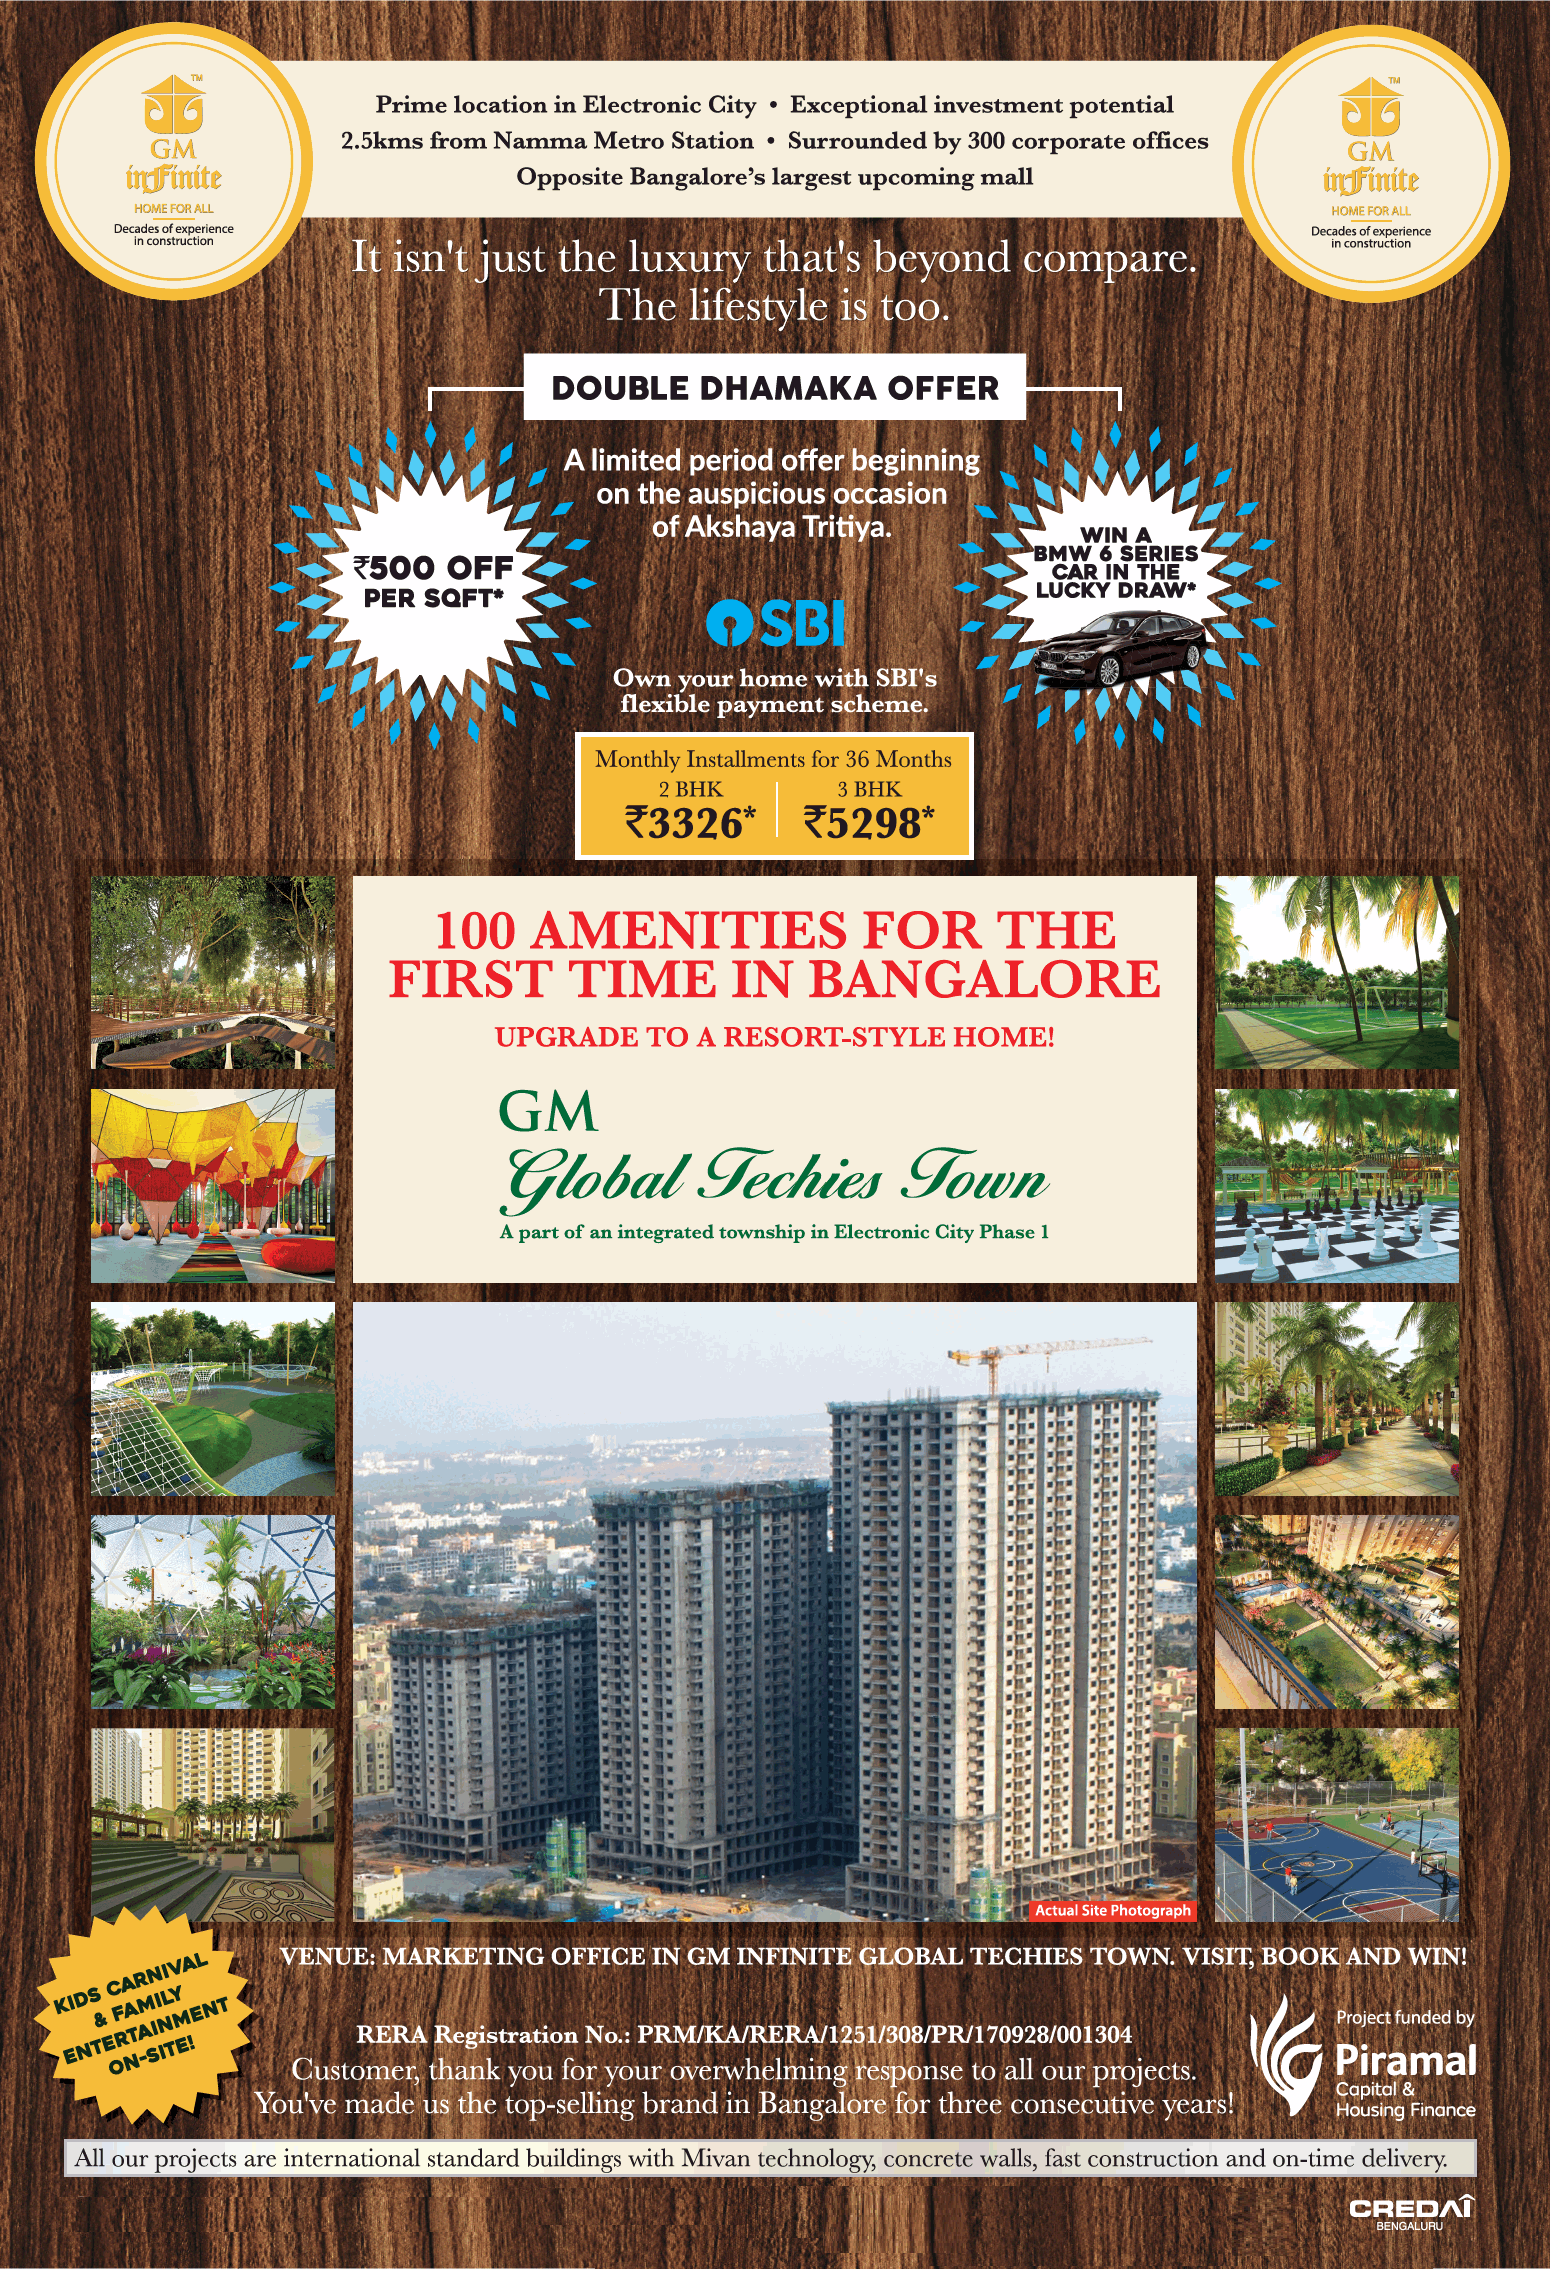 Own your home with SBI's flexible payment scheme at GM Global Techies Town in Bangalore